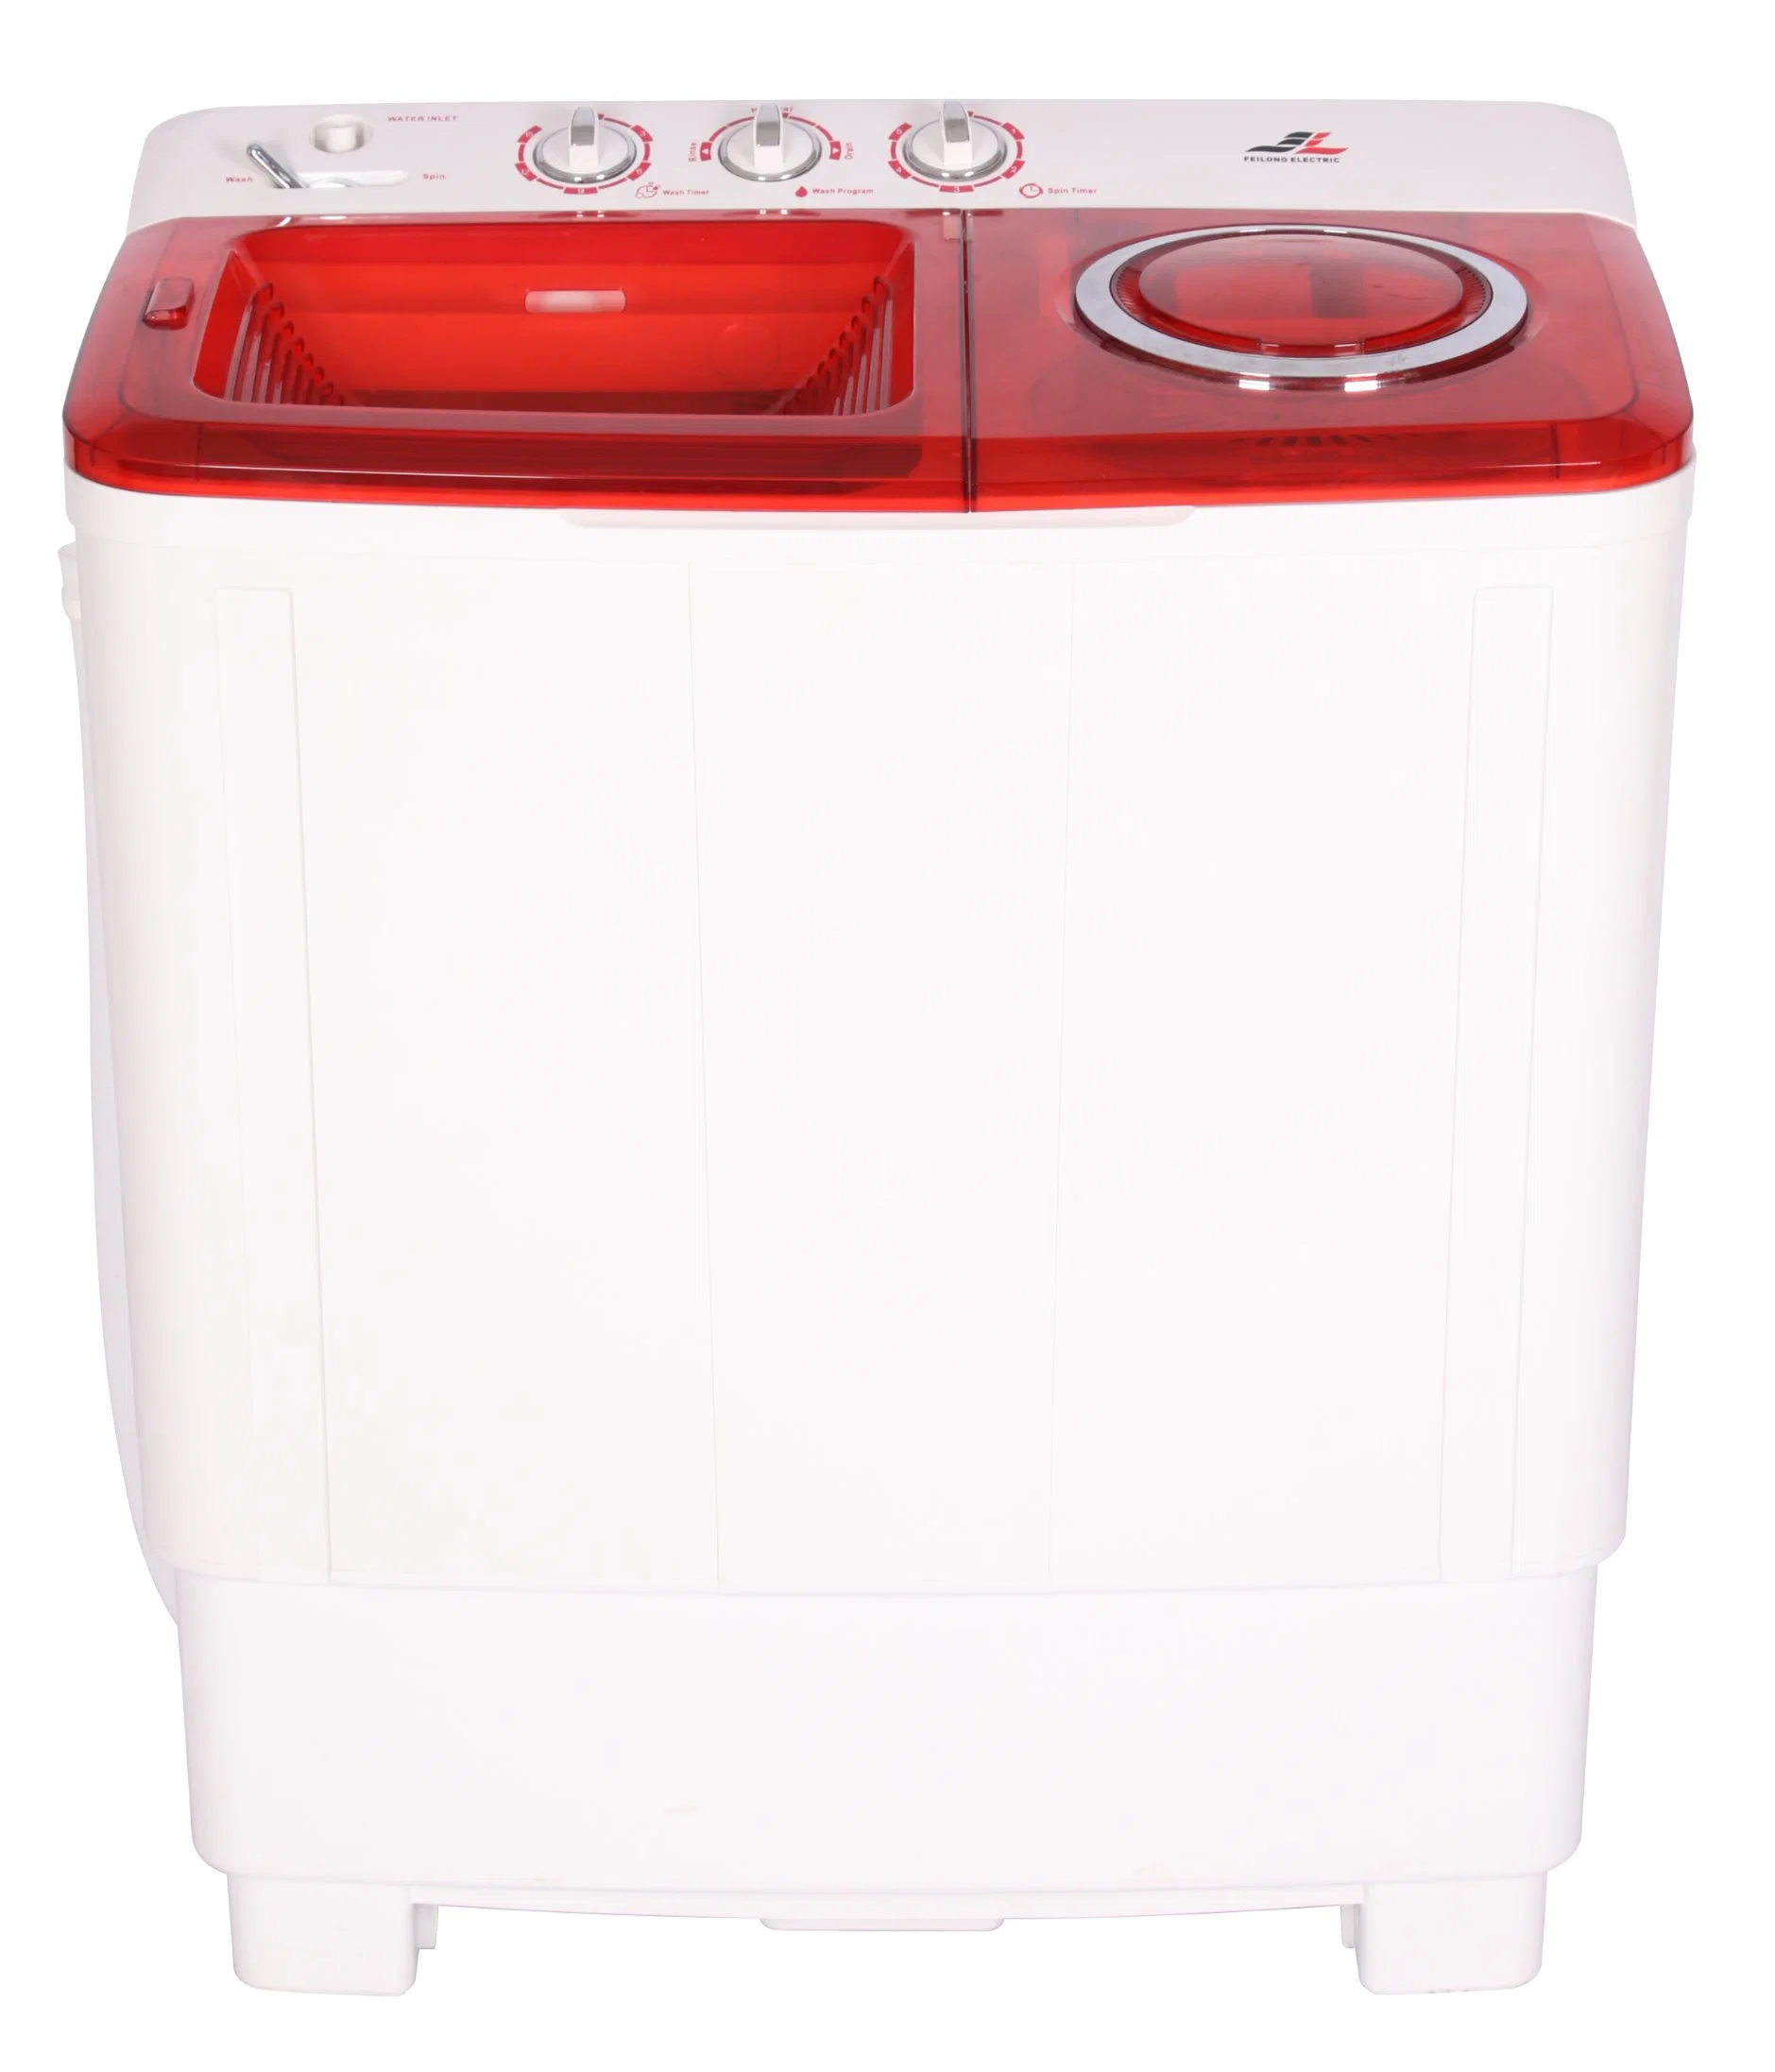 7.5kg SK Feilong Home Use Twin Tub Laundry Cleaning Top Loading Mini Washer Semi Automatic Washing Machine